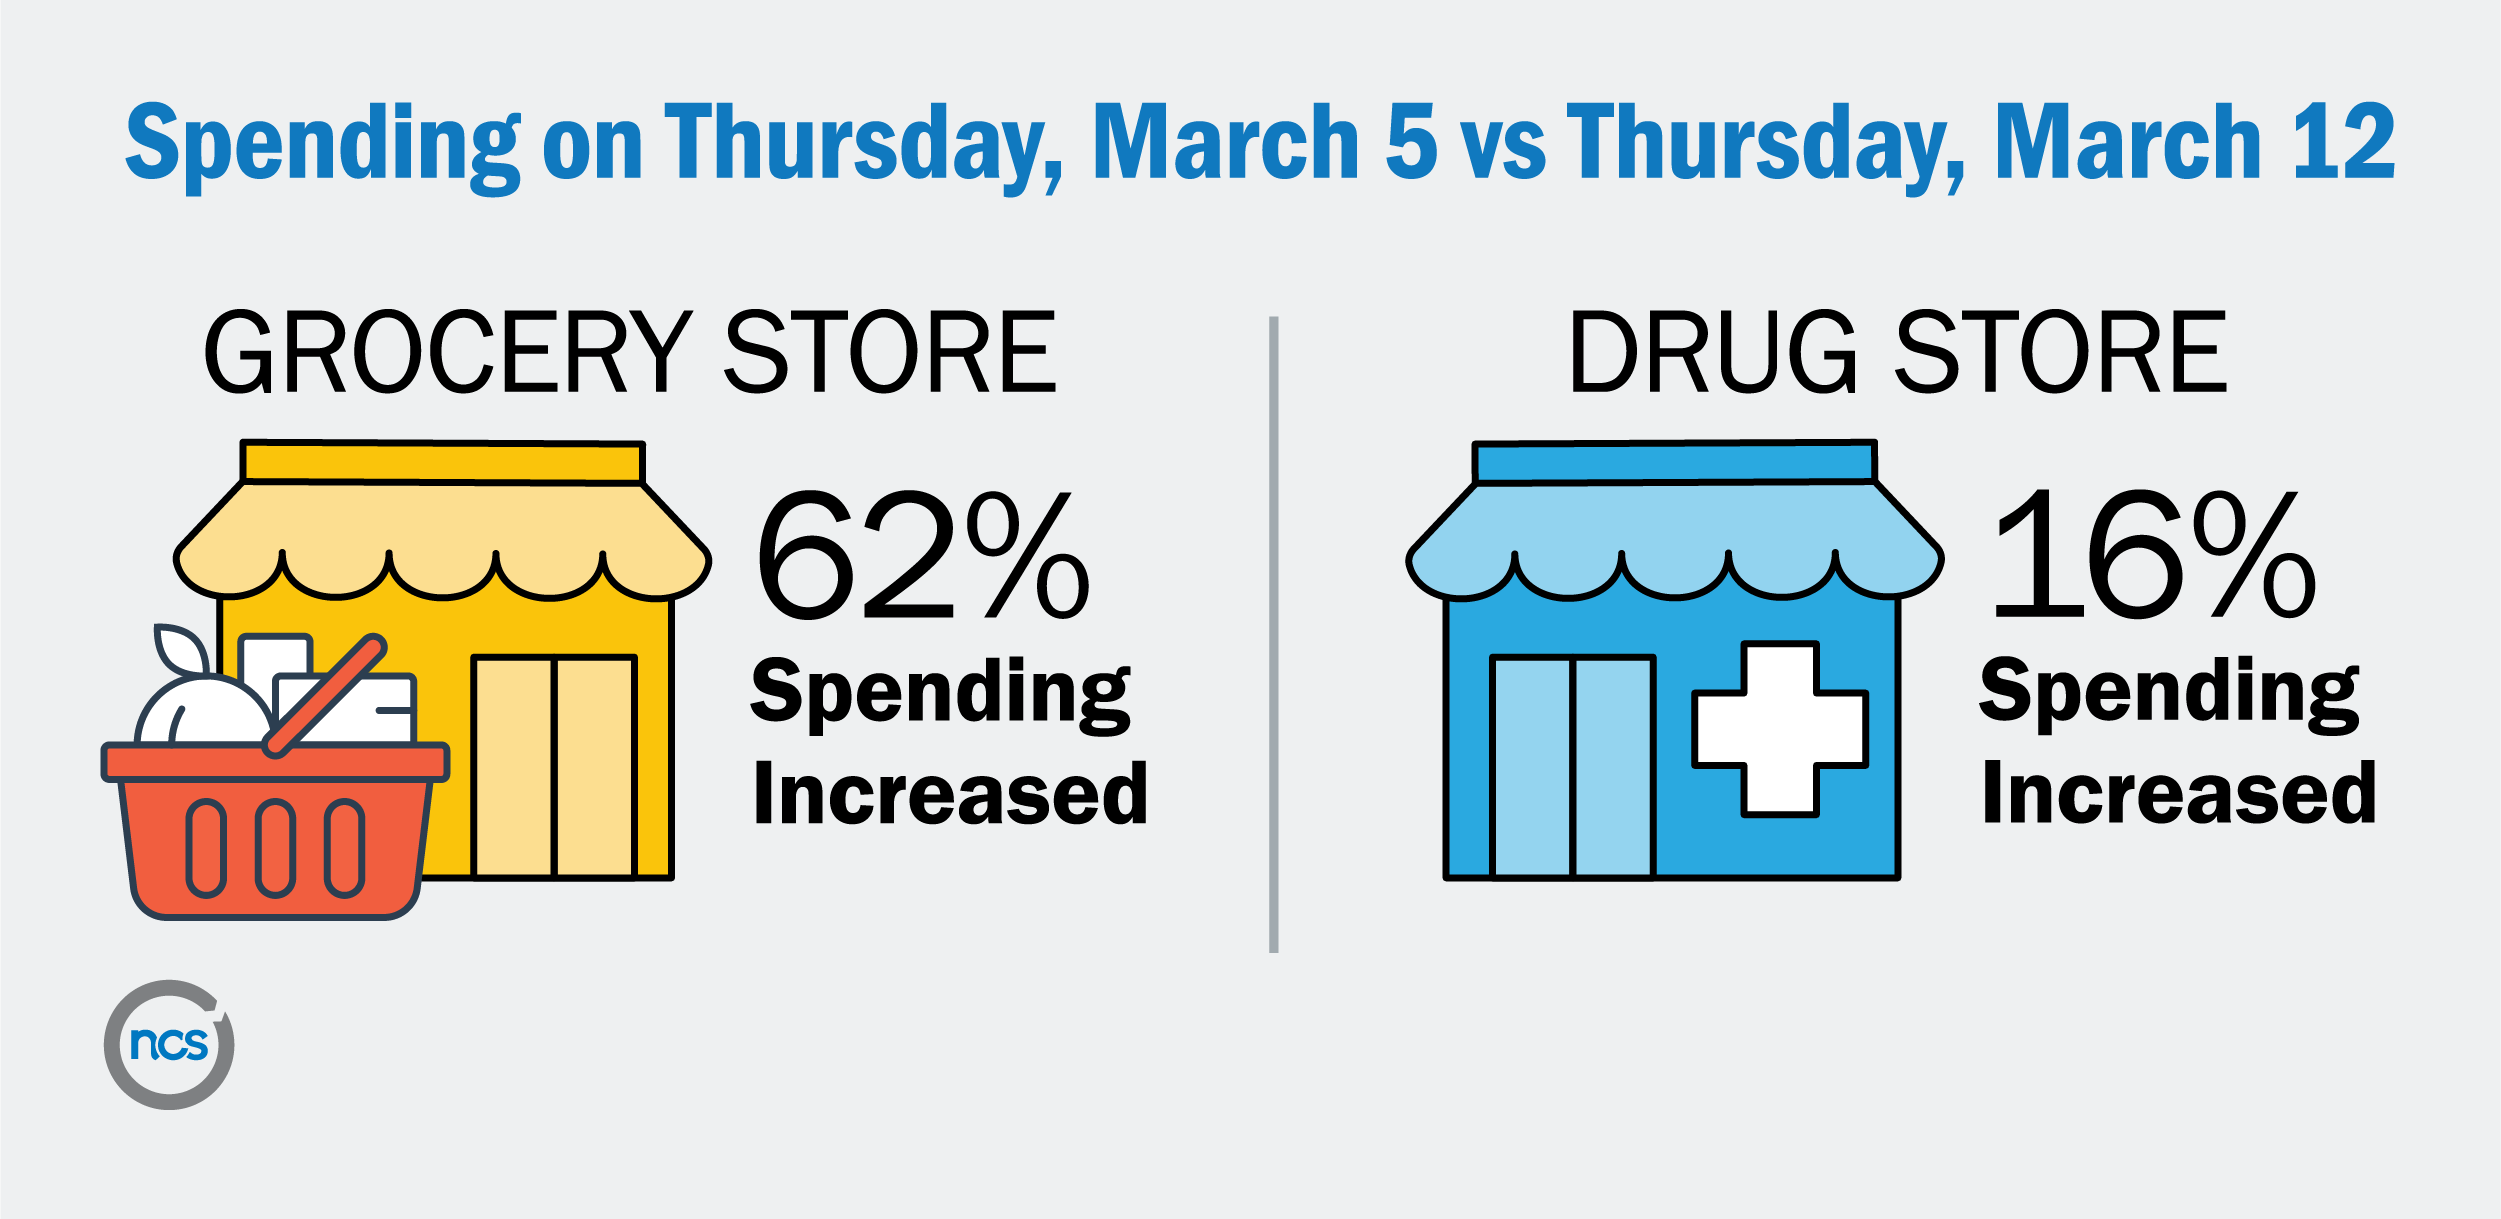 Grocery spending up 62% and drug store spending up 16% on Thursday March, 12 2020 compared to March 5, 2020.